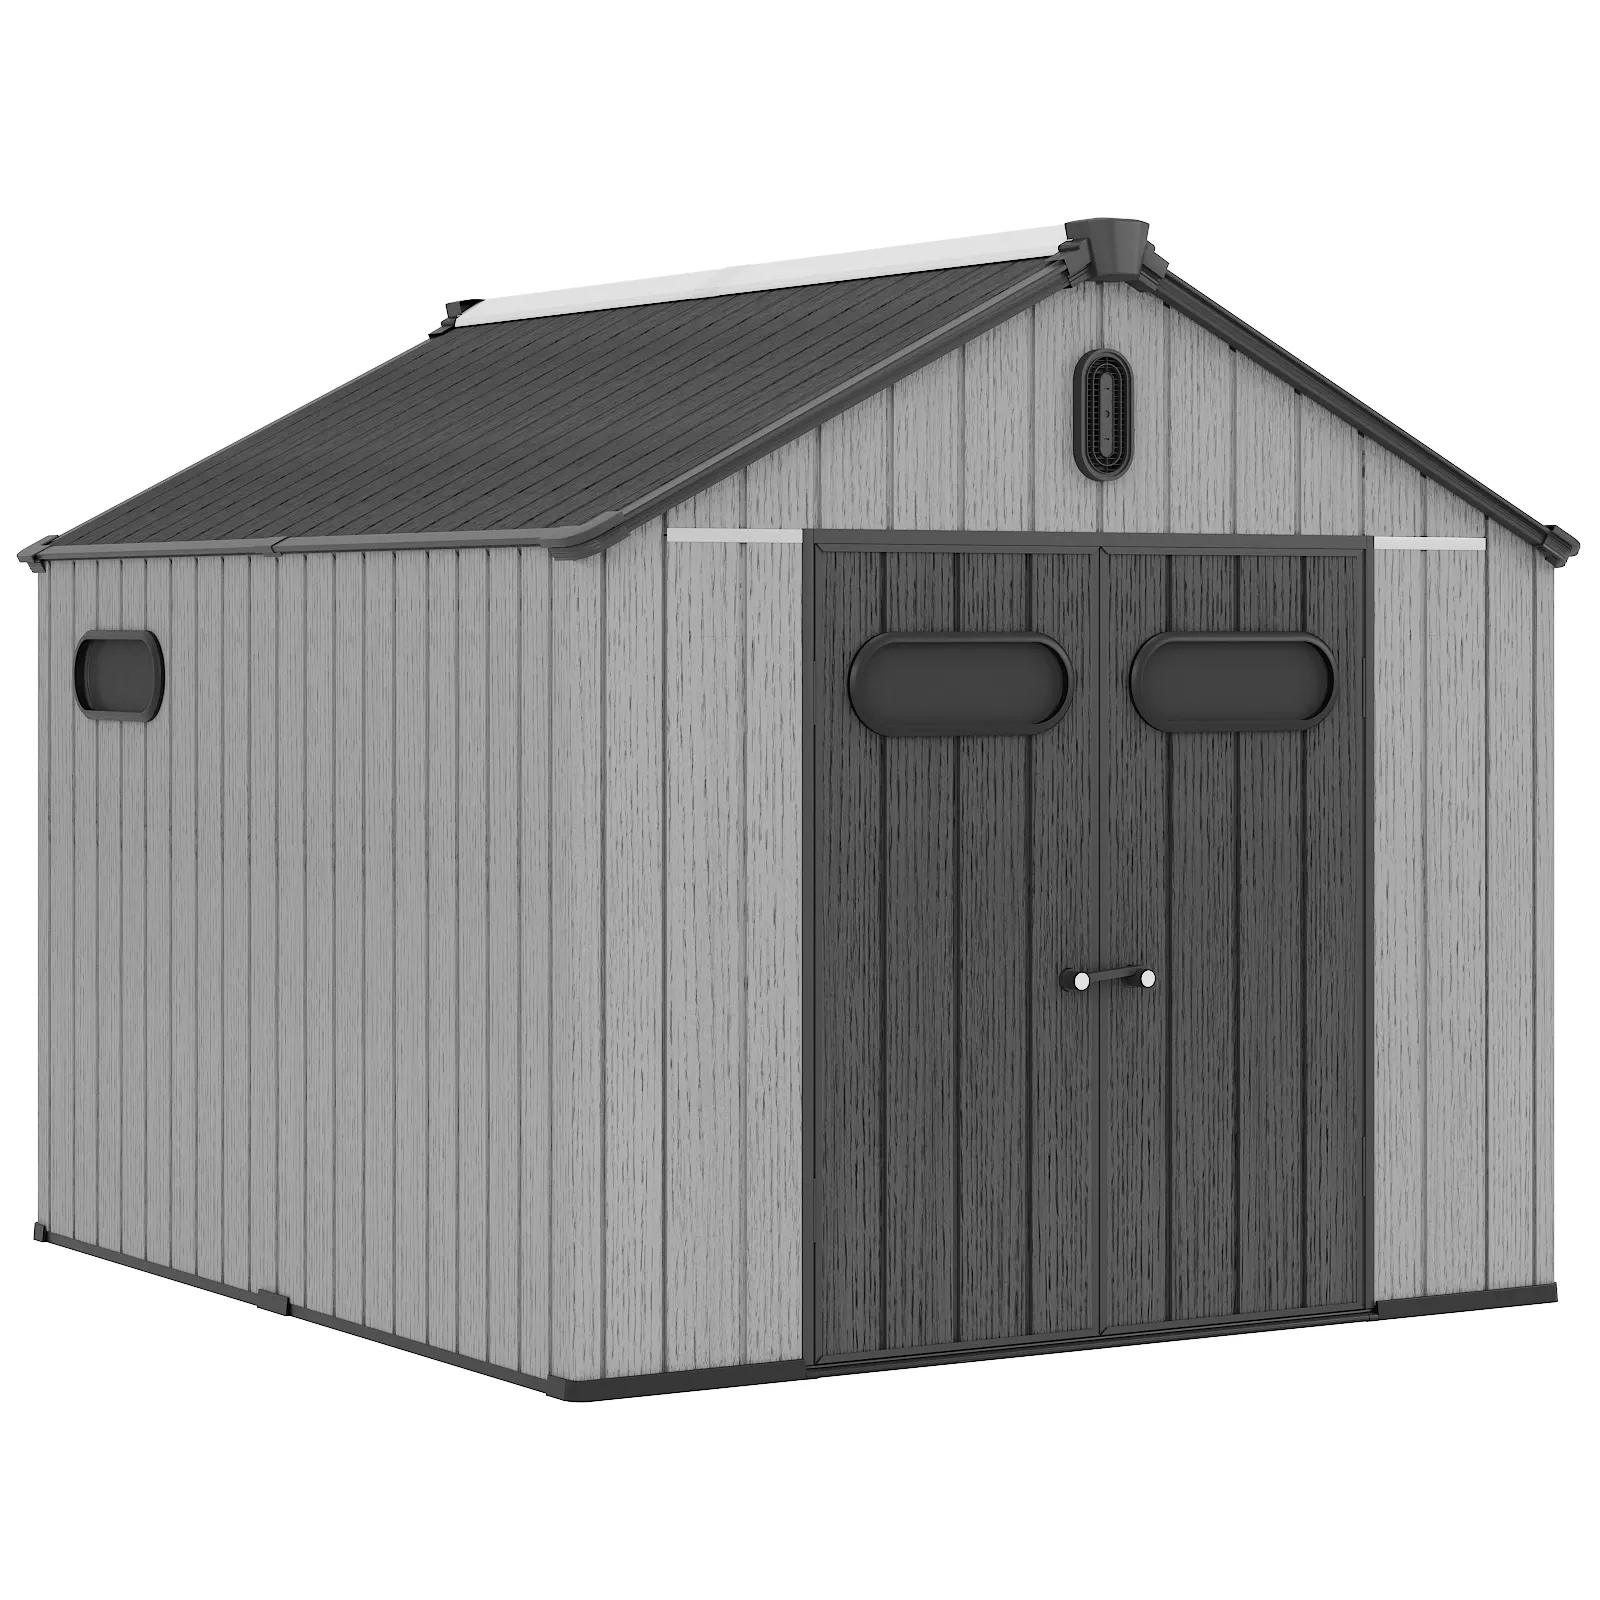 Waterproof Resin Plastic Garden Shed Outdoor Storage Cabinet for Practical & Durable Use